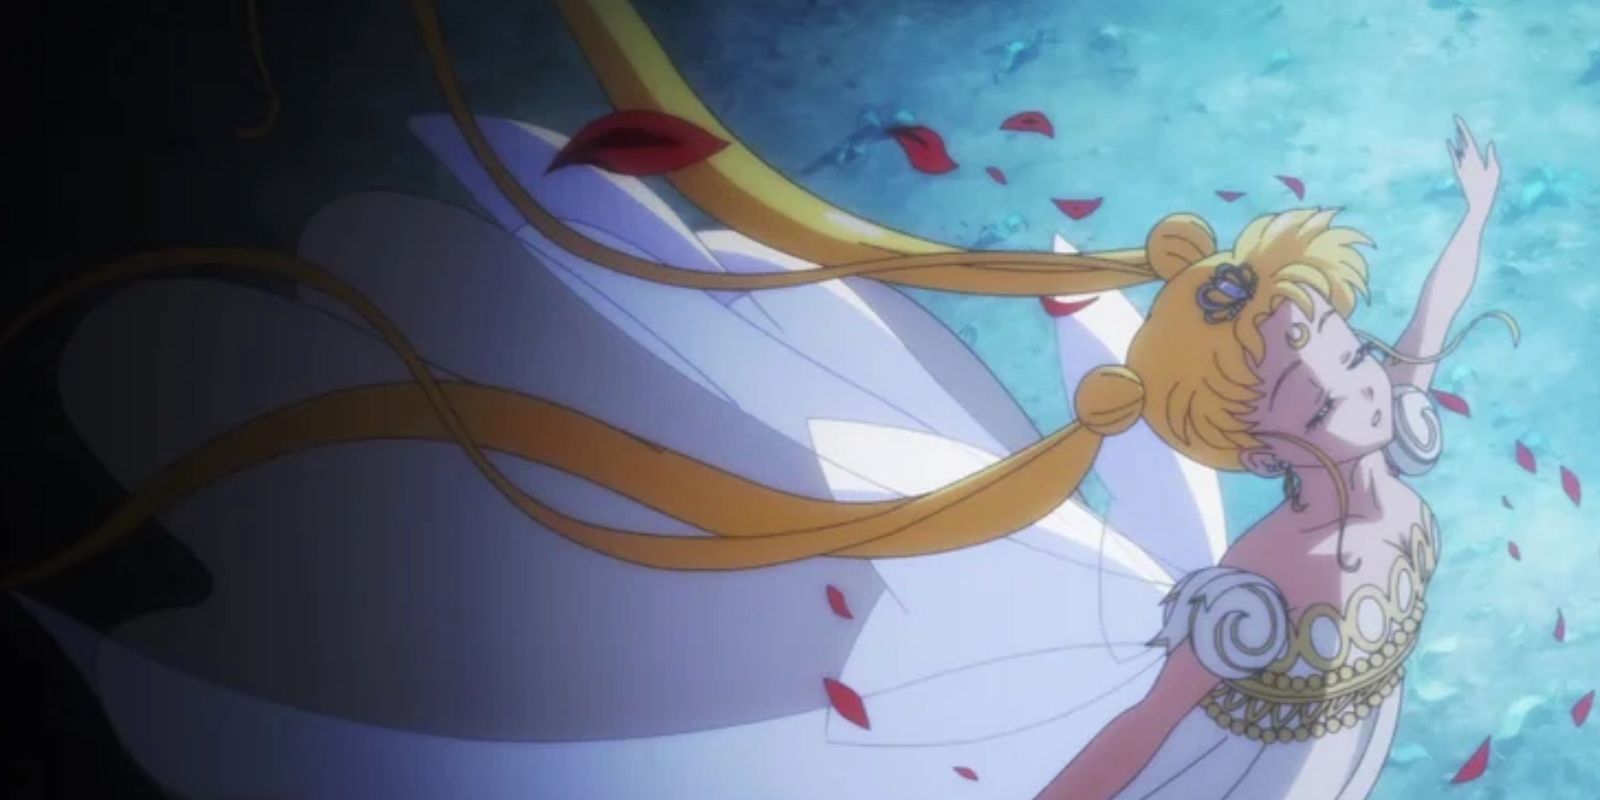 Usagi Tsukino is Princess Serenity in a white dress surrounded by rose petals in Sailor Moon Crystal